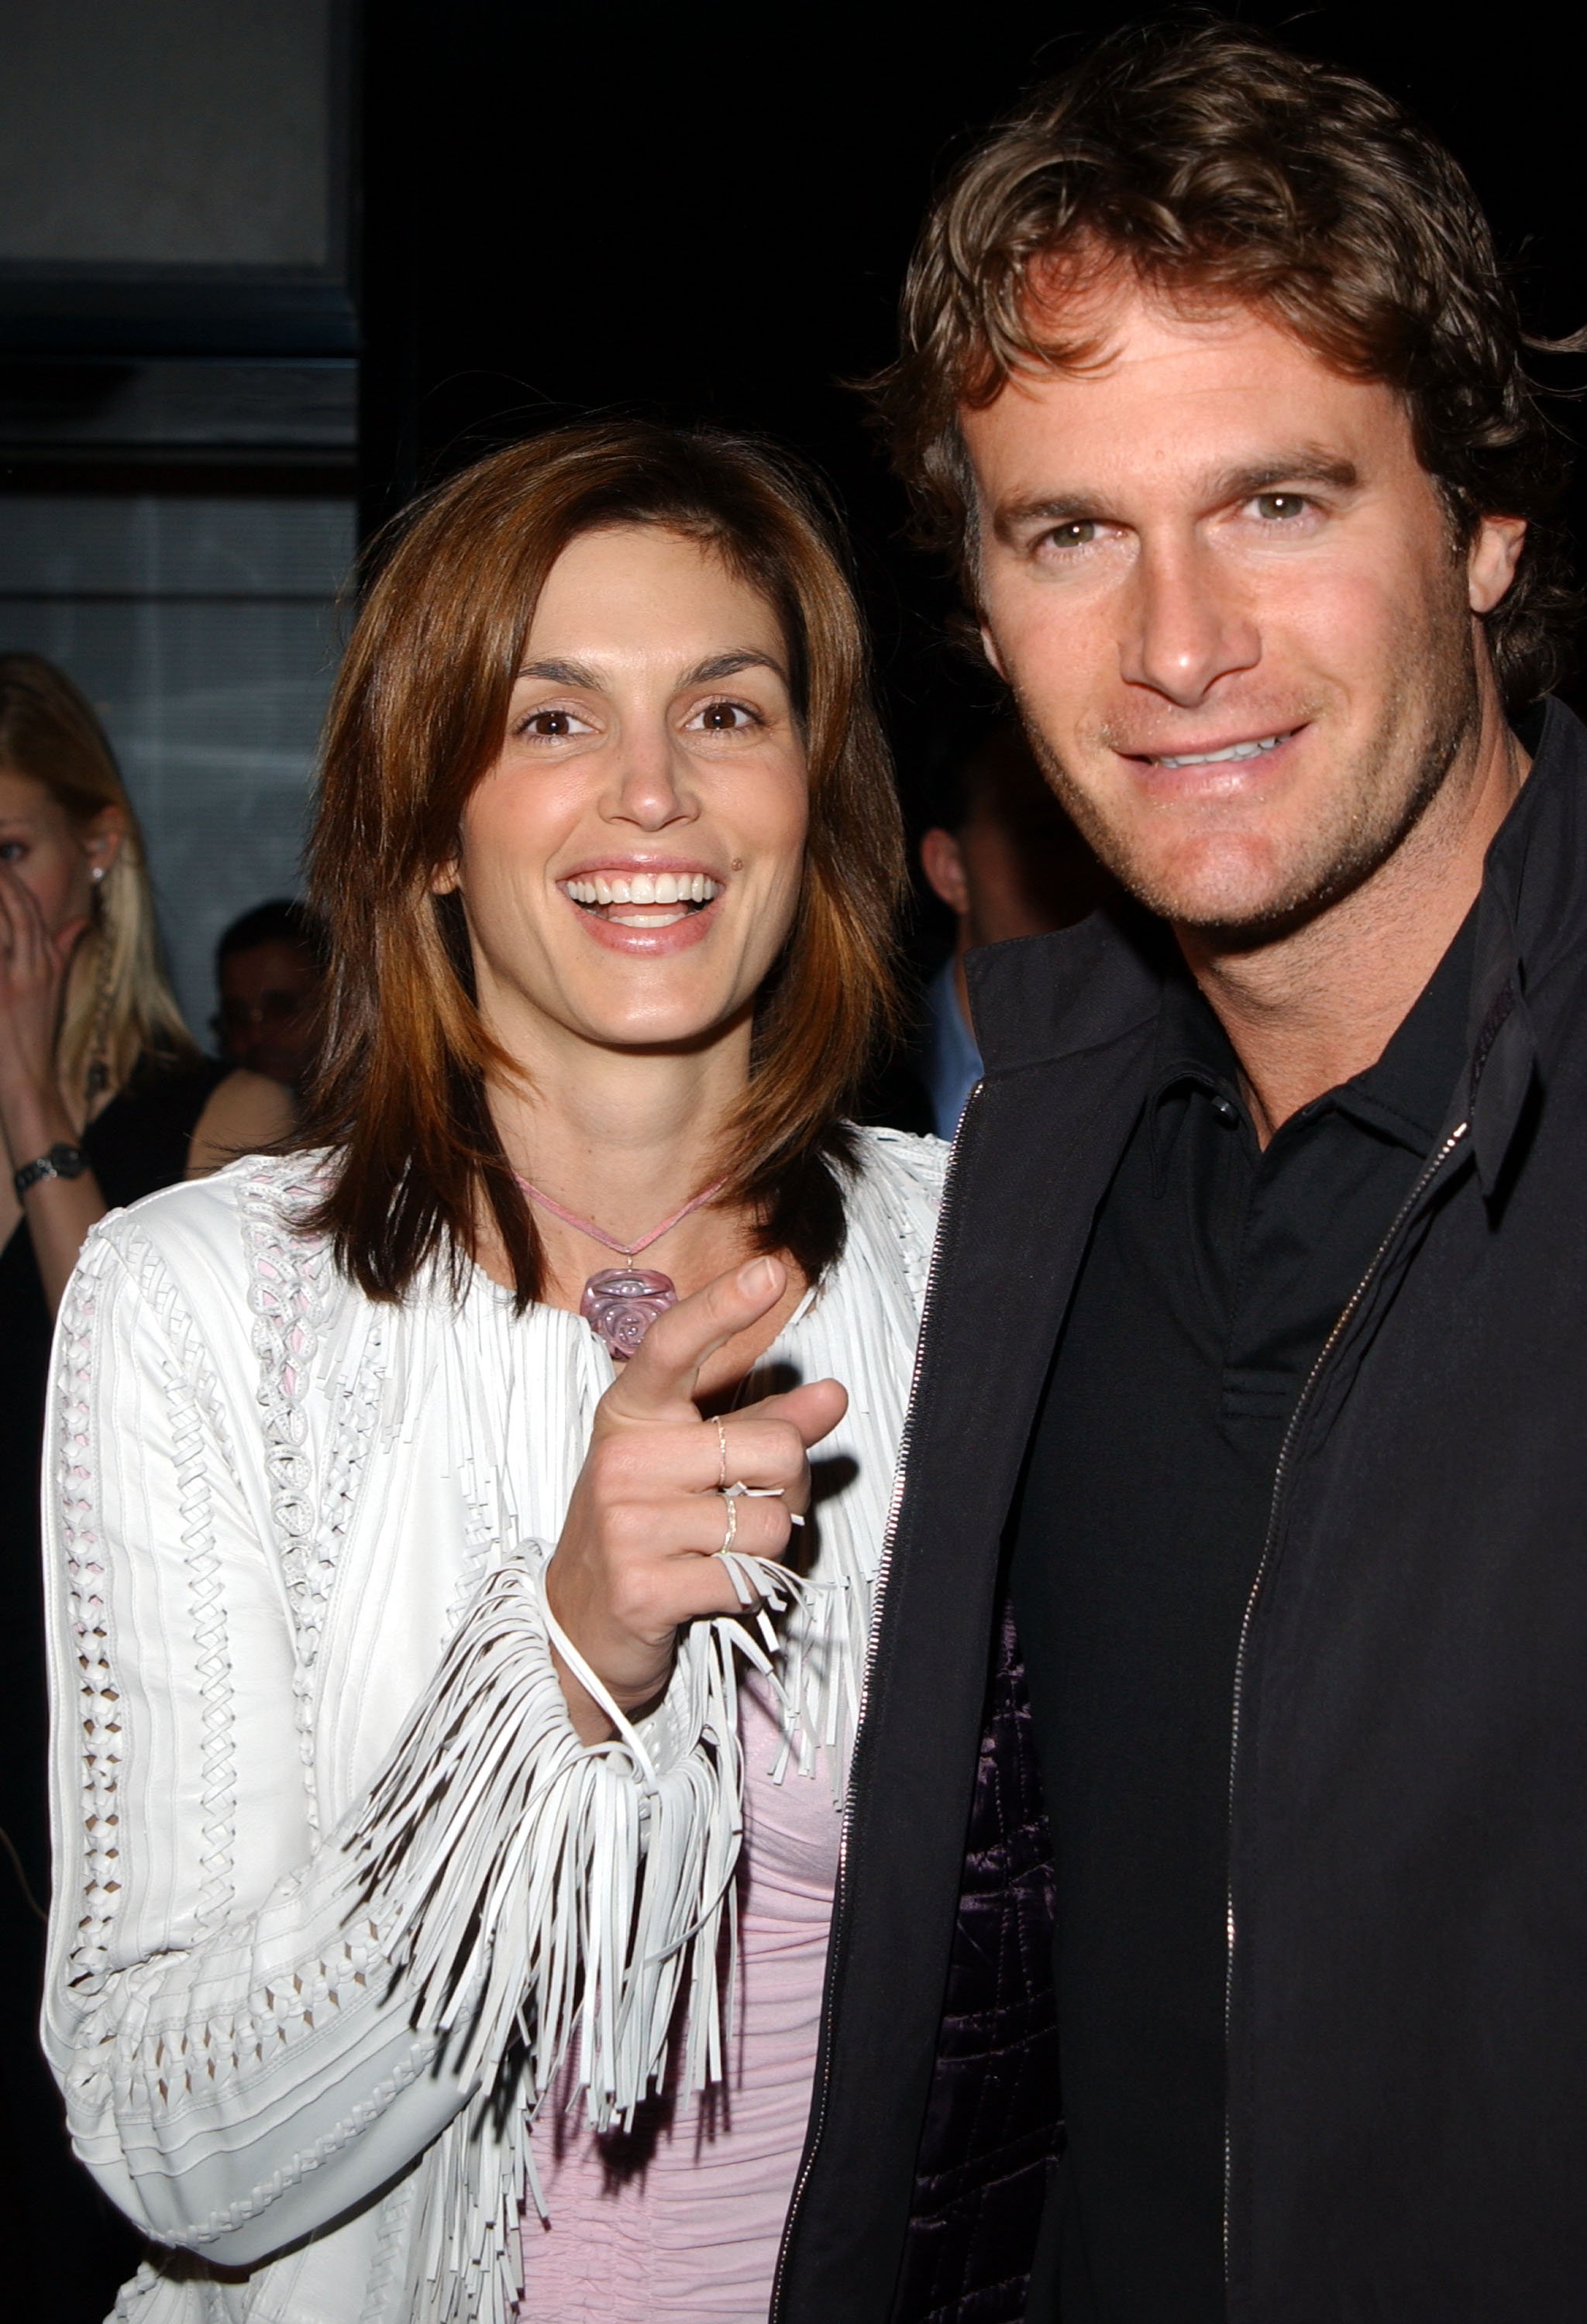 Cindy Crawford and husband Rande Gerber arrive at the Conde Nast Traveler Hot List party at the W Hotel May 1, 2002, in New York City. | Source: Getty Images.